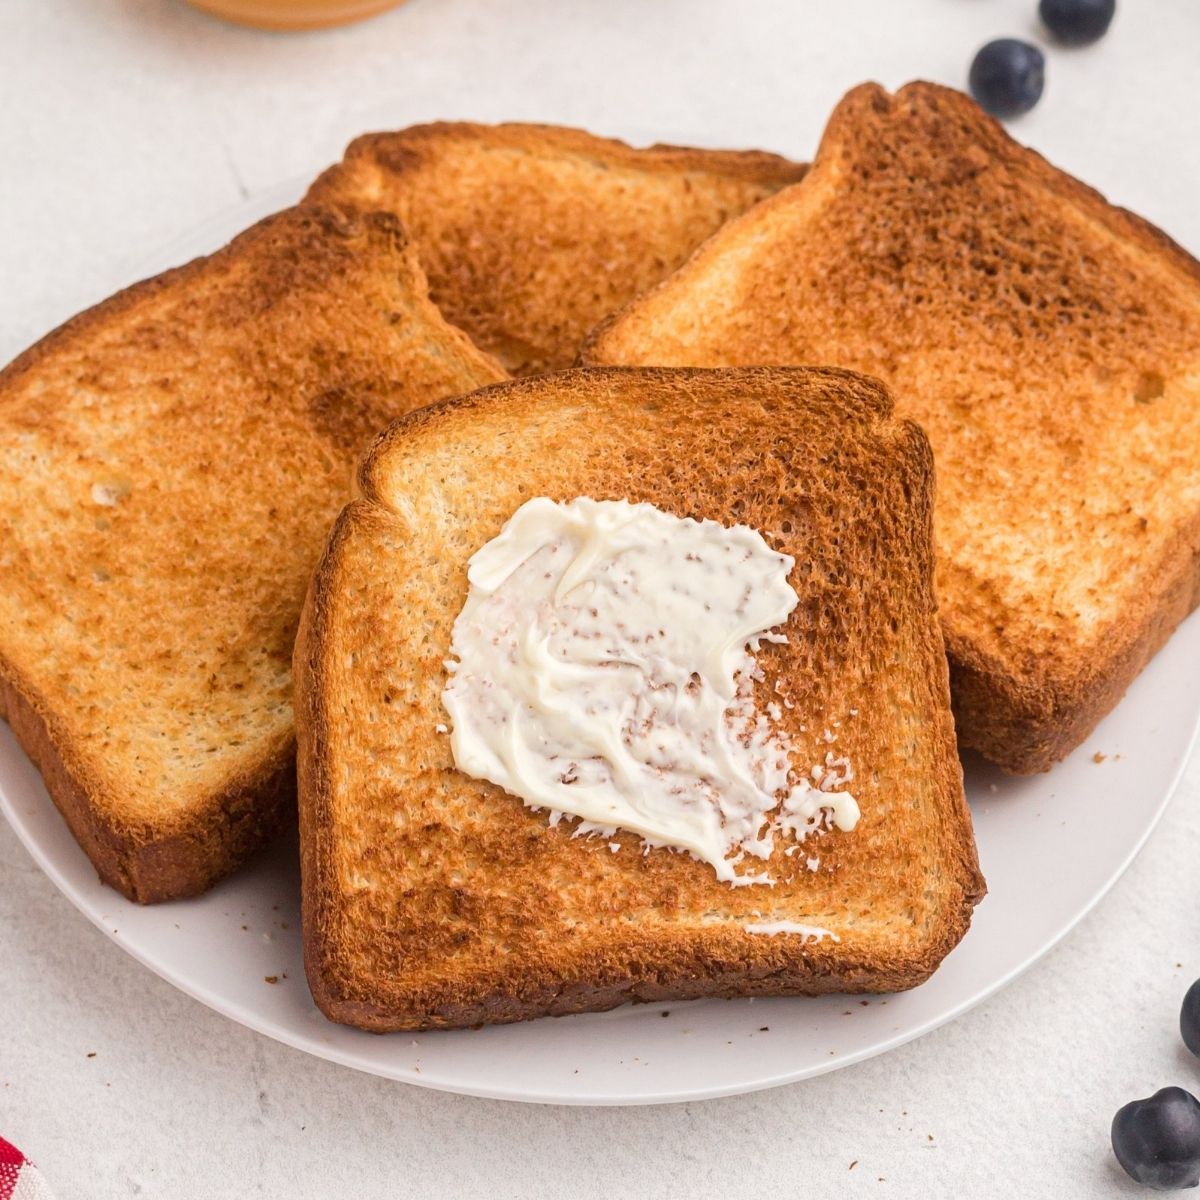 Golden toast with one being buttered. Served on a white plate with blueberries and butter.